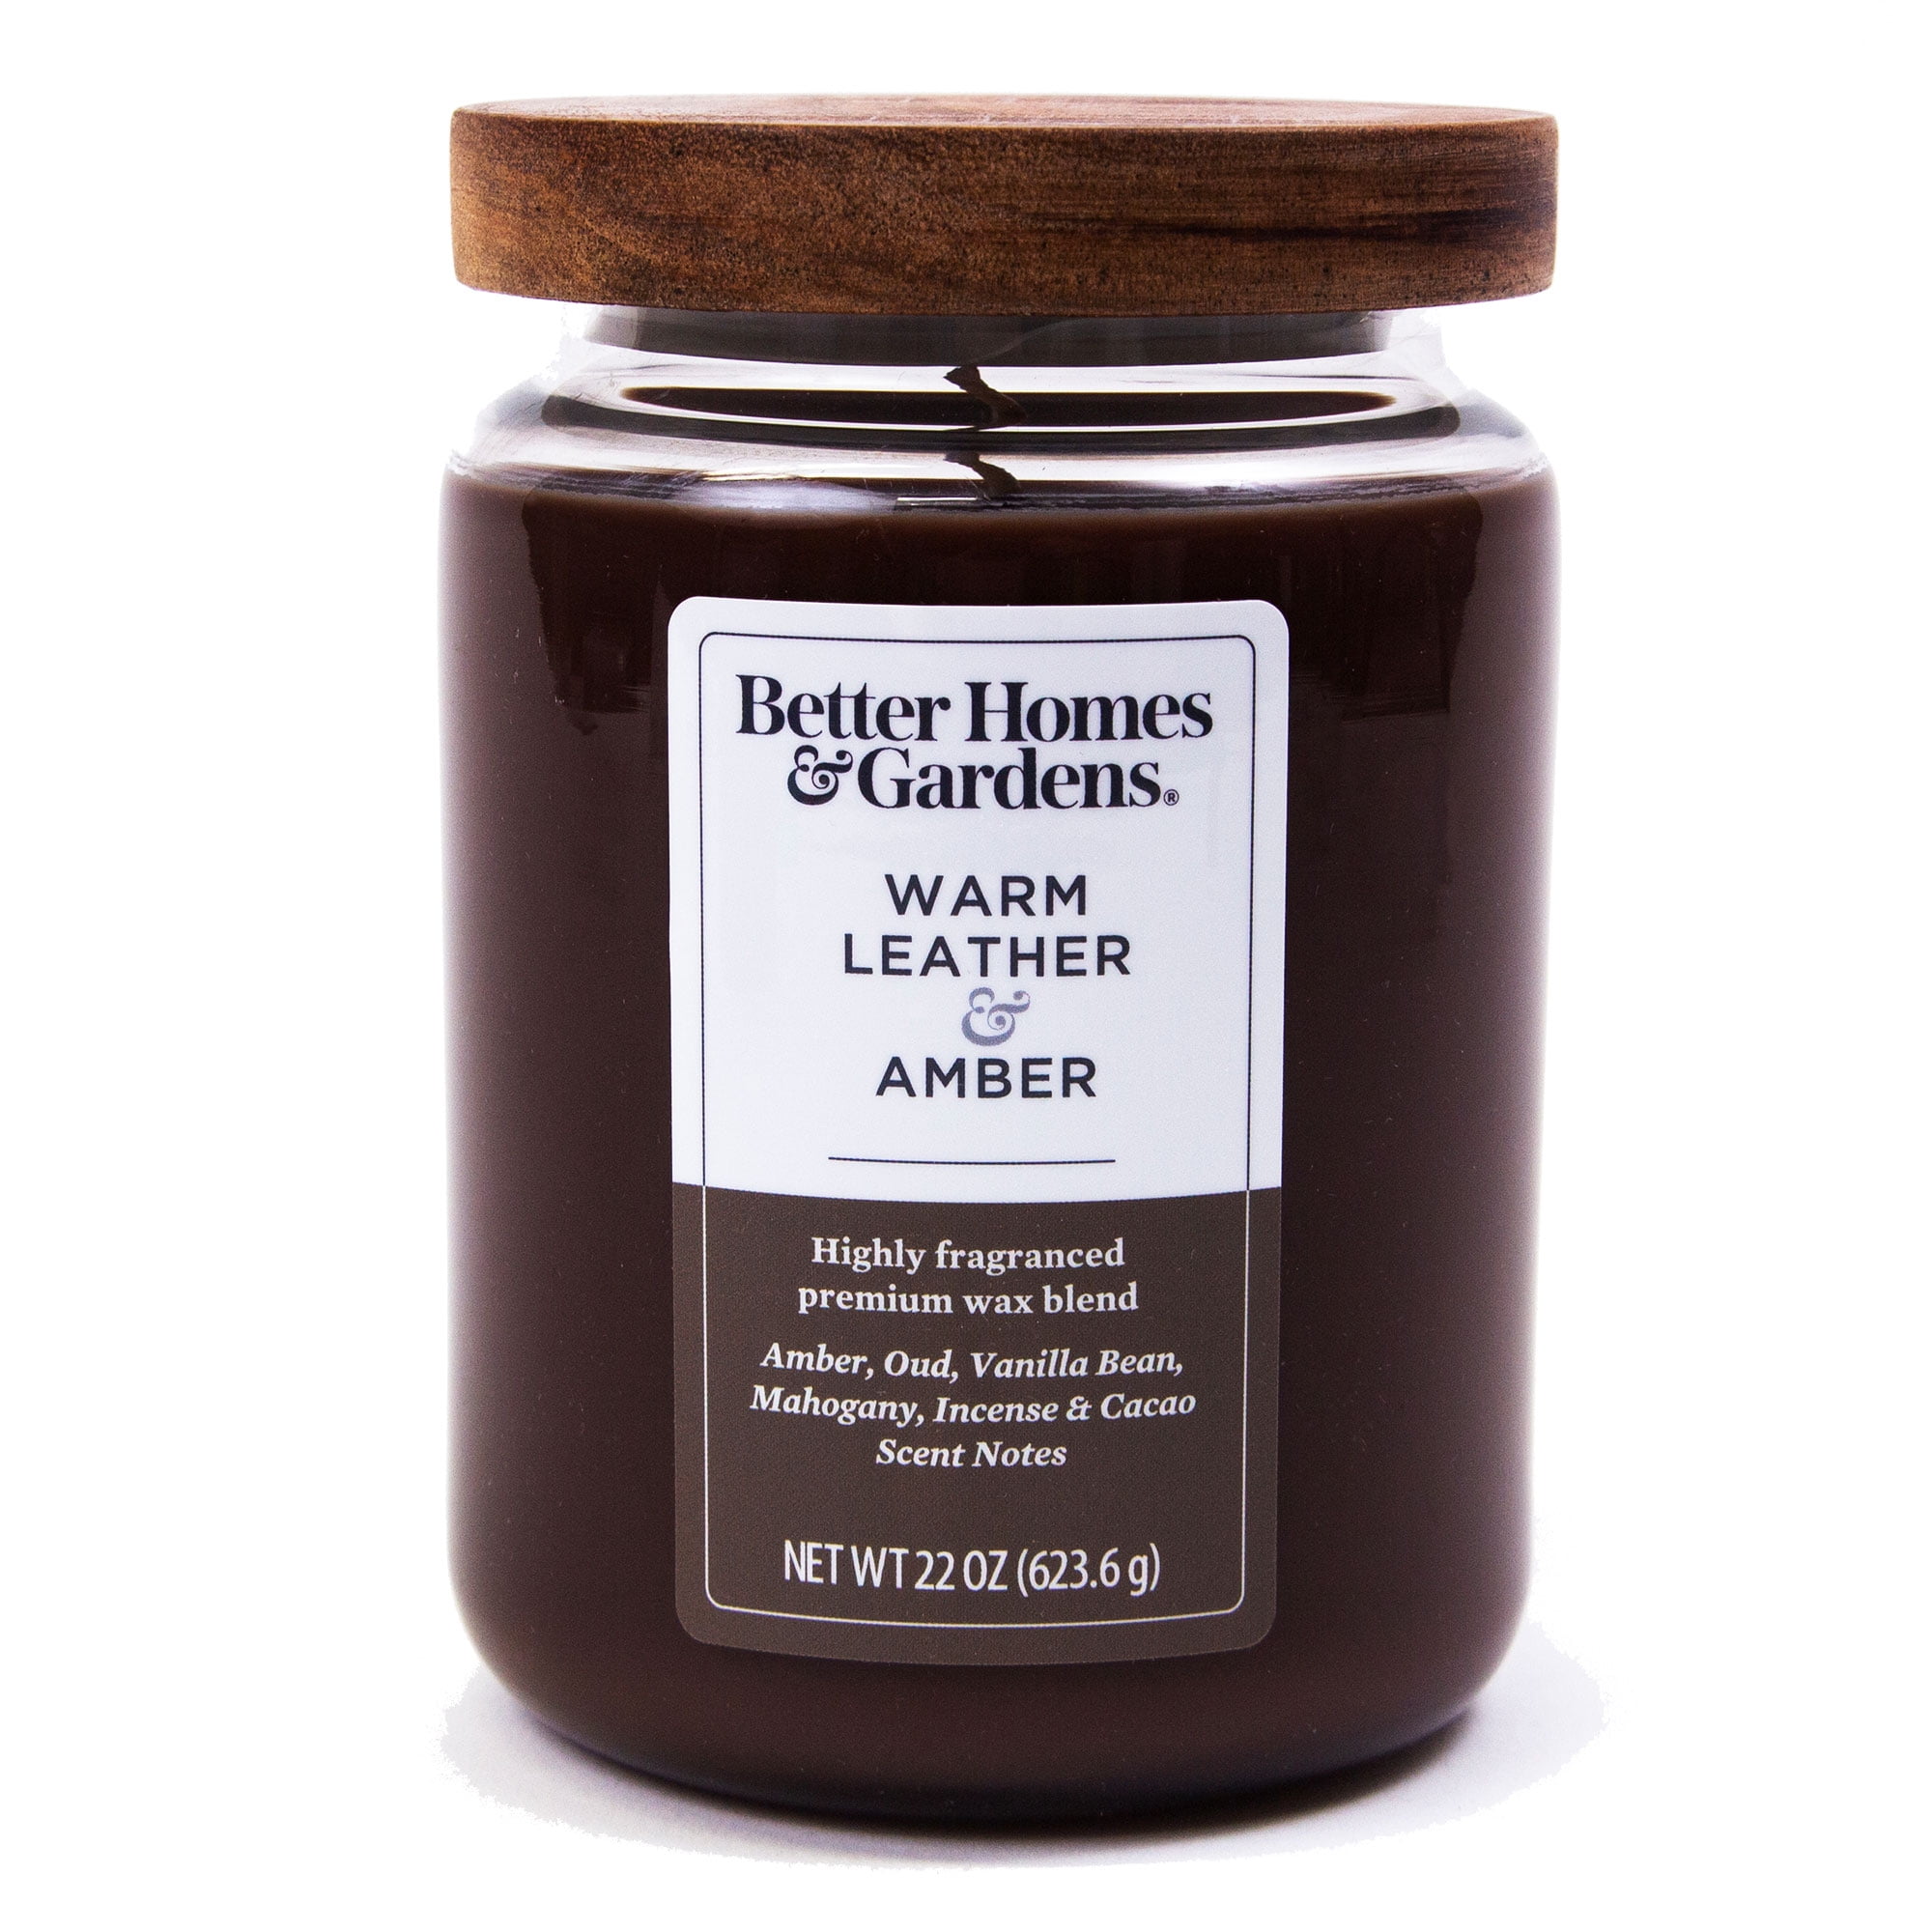 Better Homes & Gardens 22oz Warm Leathered Amber Scented Single-Wick Jar Candle